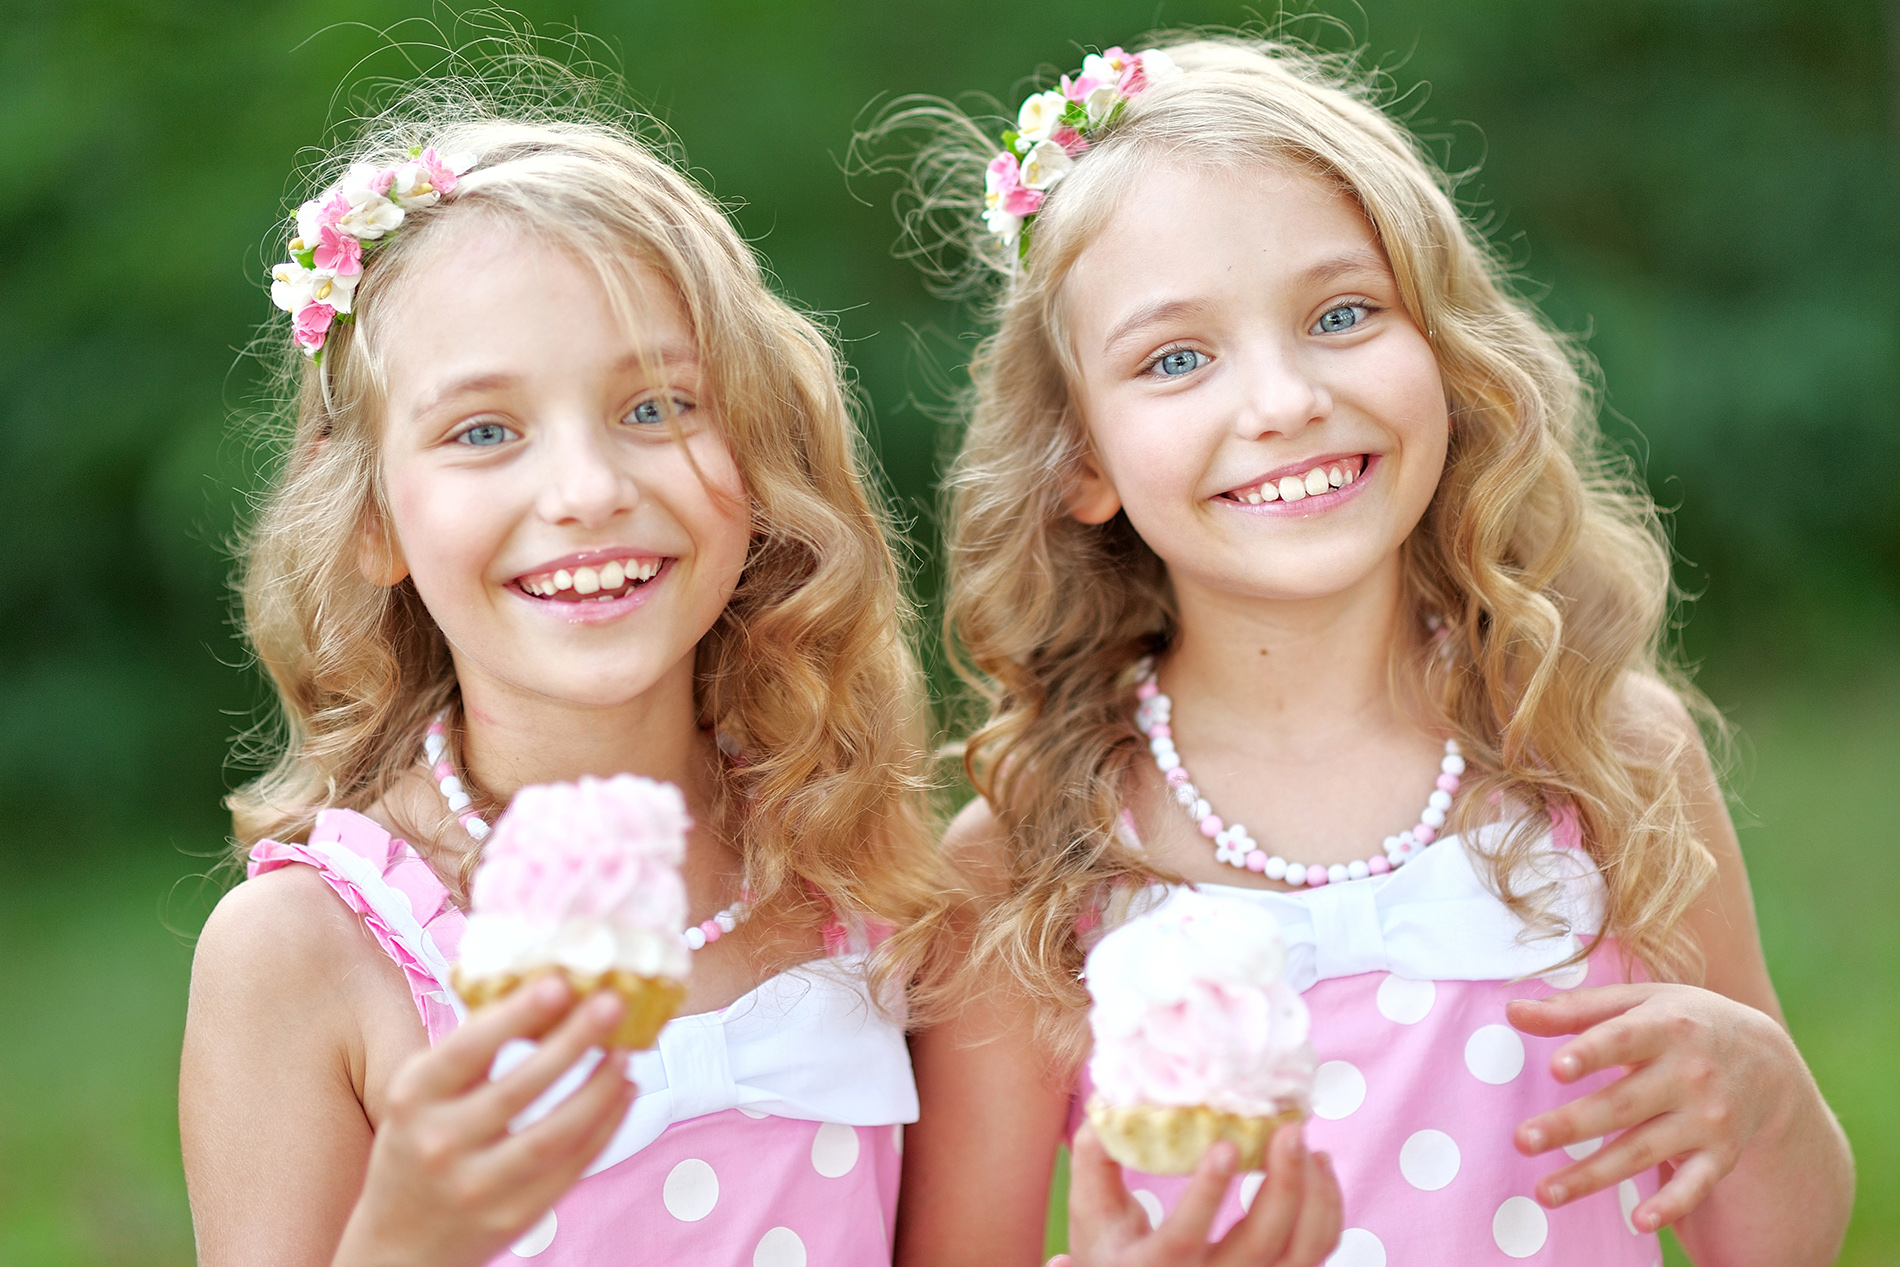 Twin girls wearing pink dresses with ice cream cones